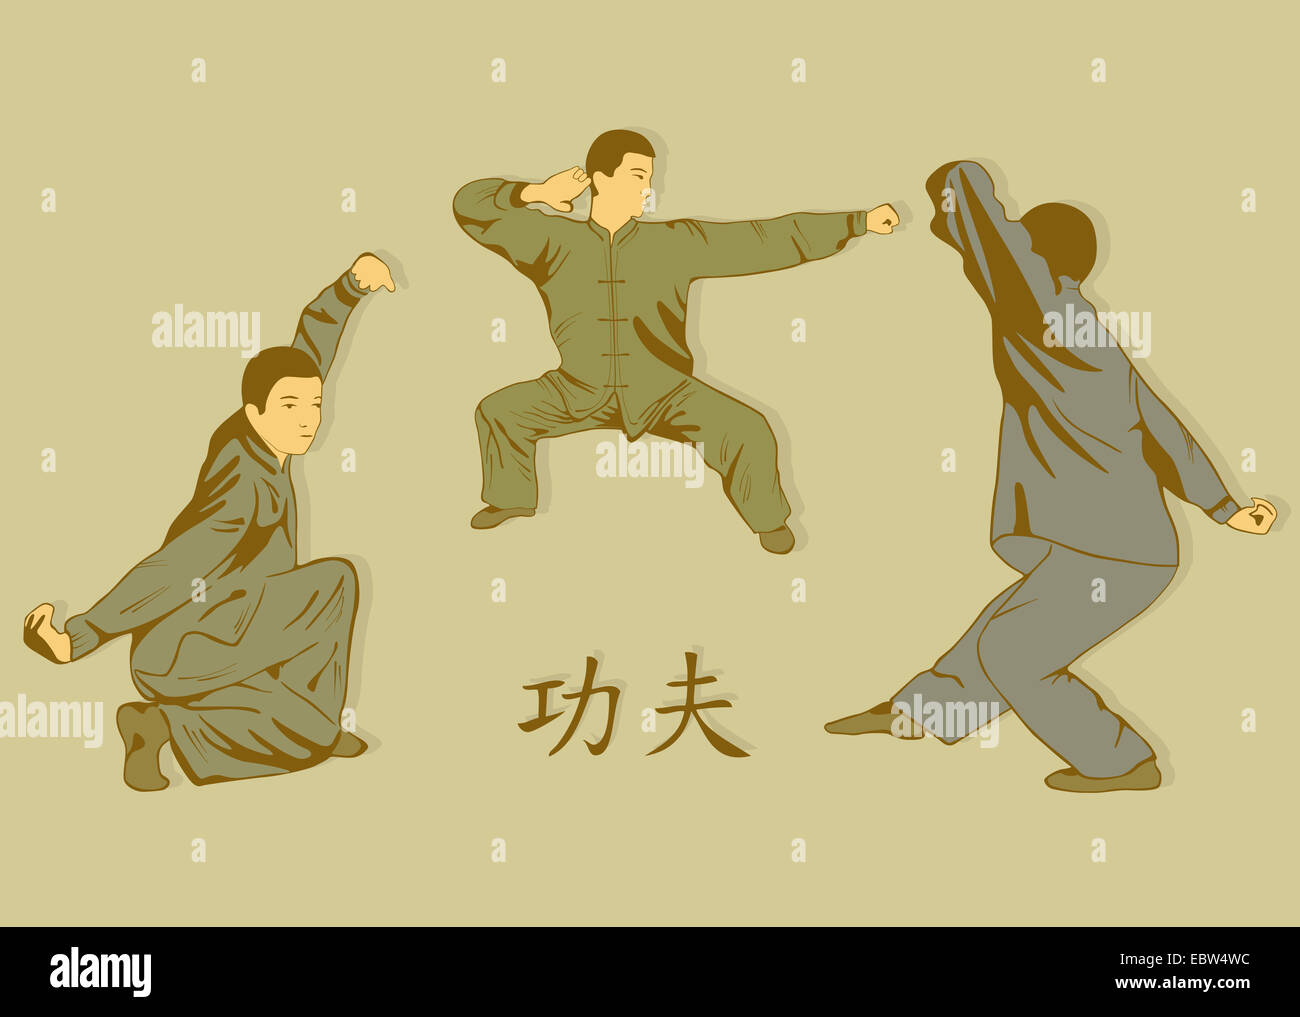 three men represent kung fu on a green background inscription on an EBW4WC